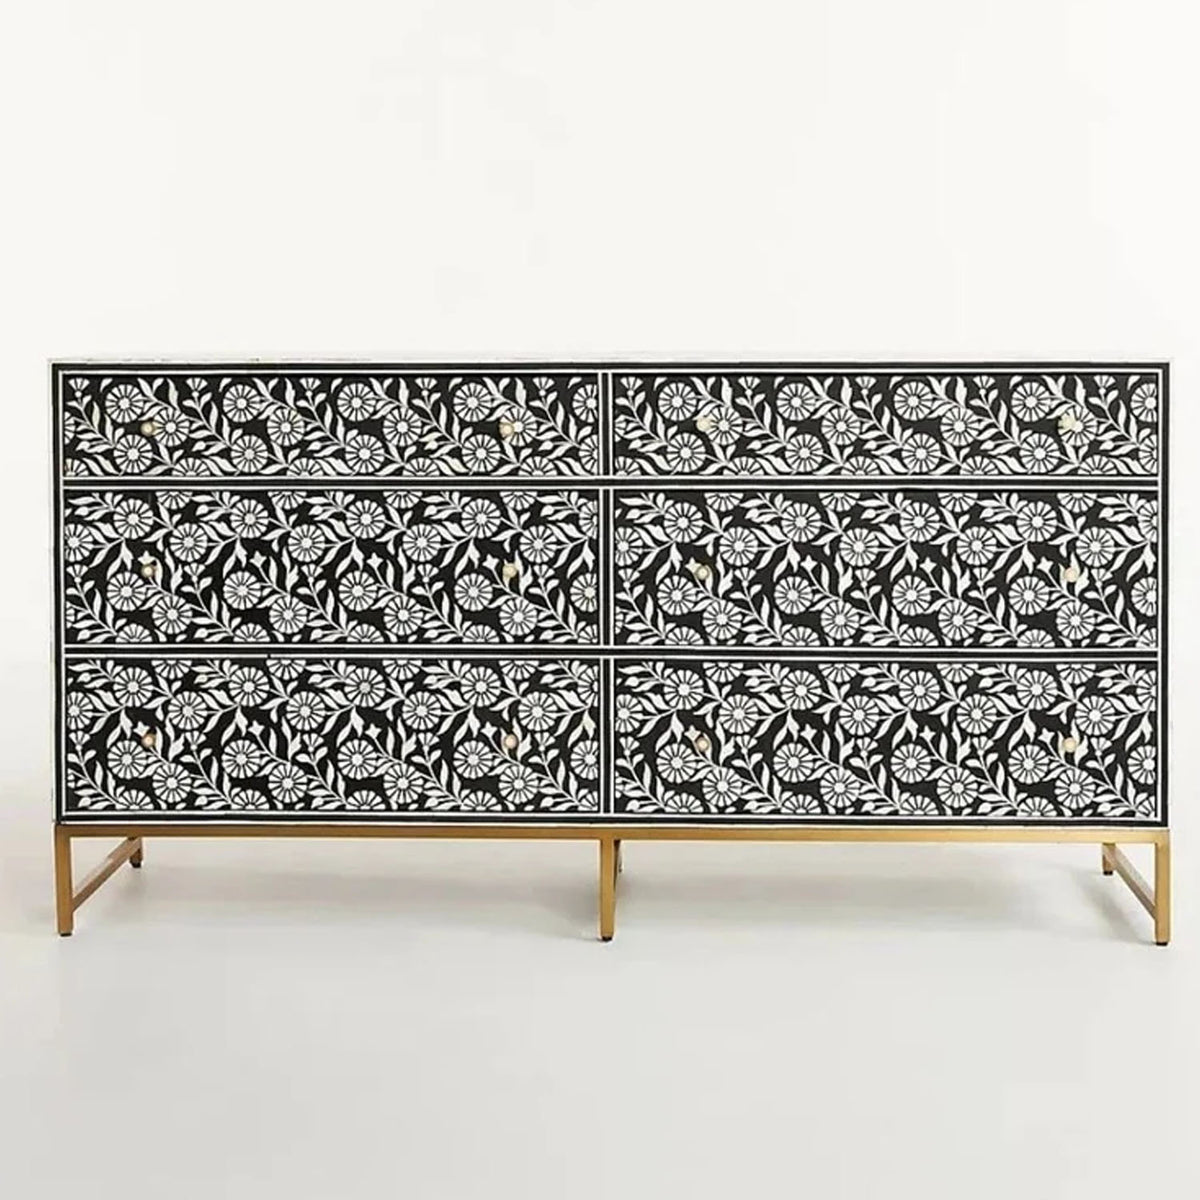 Bone Inlay Chest of 6 Drawer Black White Floral Commode Dresser Sideboard handCrafted Home Decor Inlay Furniture by Bright Handicrafts - Notbrand